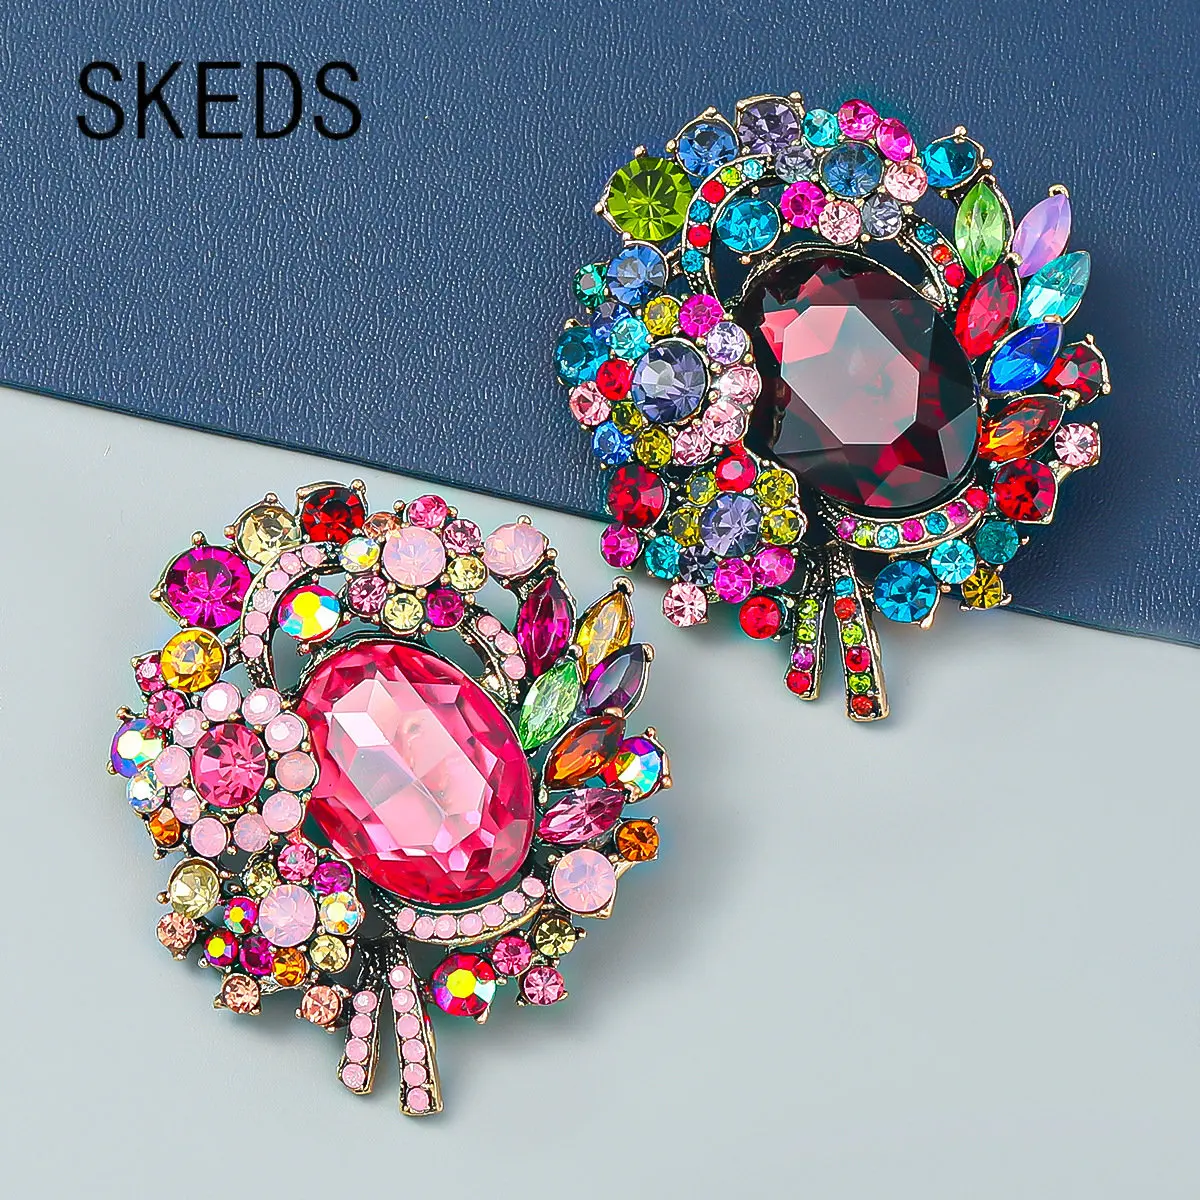 SKEDS Fashion Delicate Luxury Octopus Colorful Rhinestone Pins Brooches For  Women Lady Exquisite Crystal Sea Aniaml Badges Pin